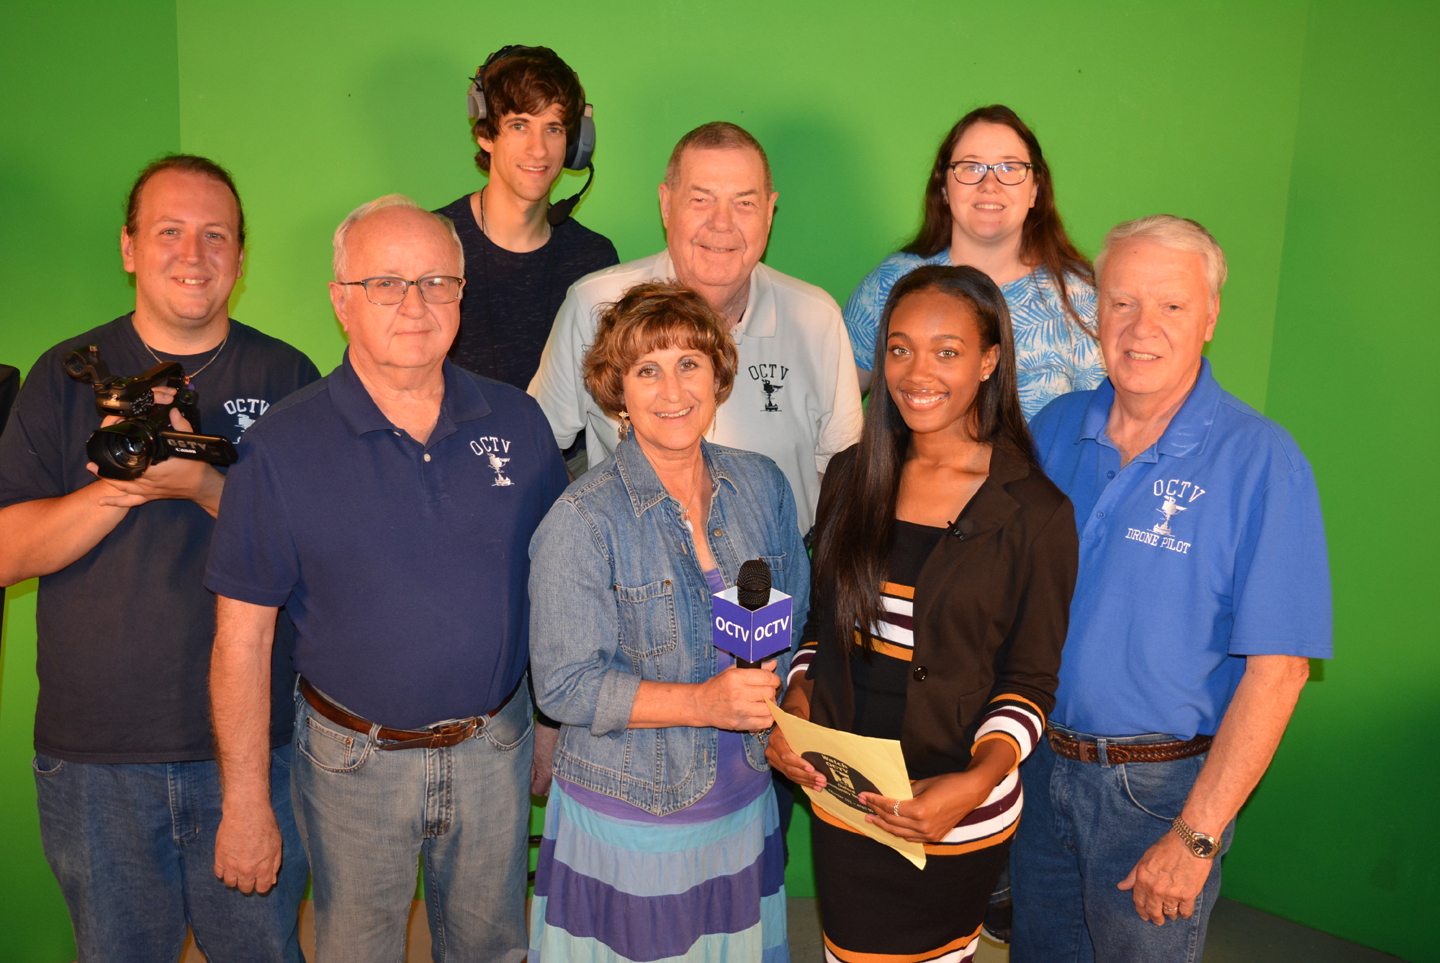 The staff of Oxford Community Television (OCTV) includes (from left) Russel Currier, Dave Kenny, Kyle Snage, Station Manager Bill Service, Production Manager Teri Stiles, Alexis Ware, Laurie Racz and Elgin Nichols. Photo by C.J. Carnacchio.